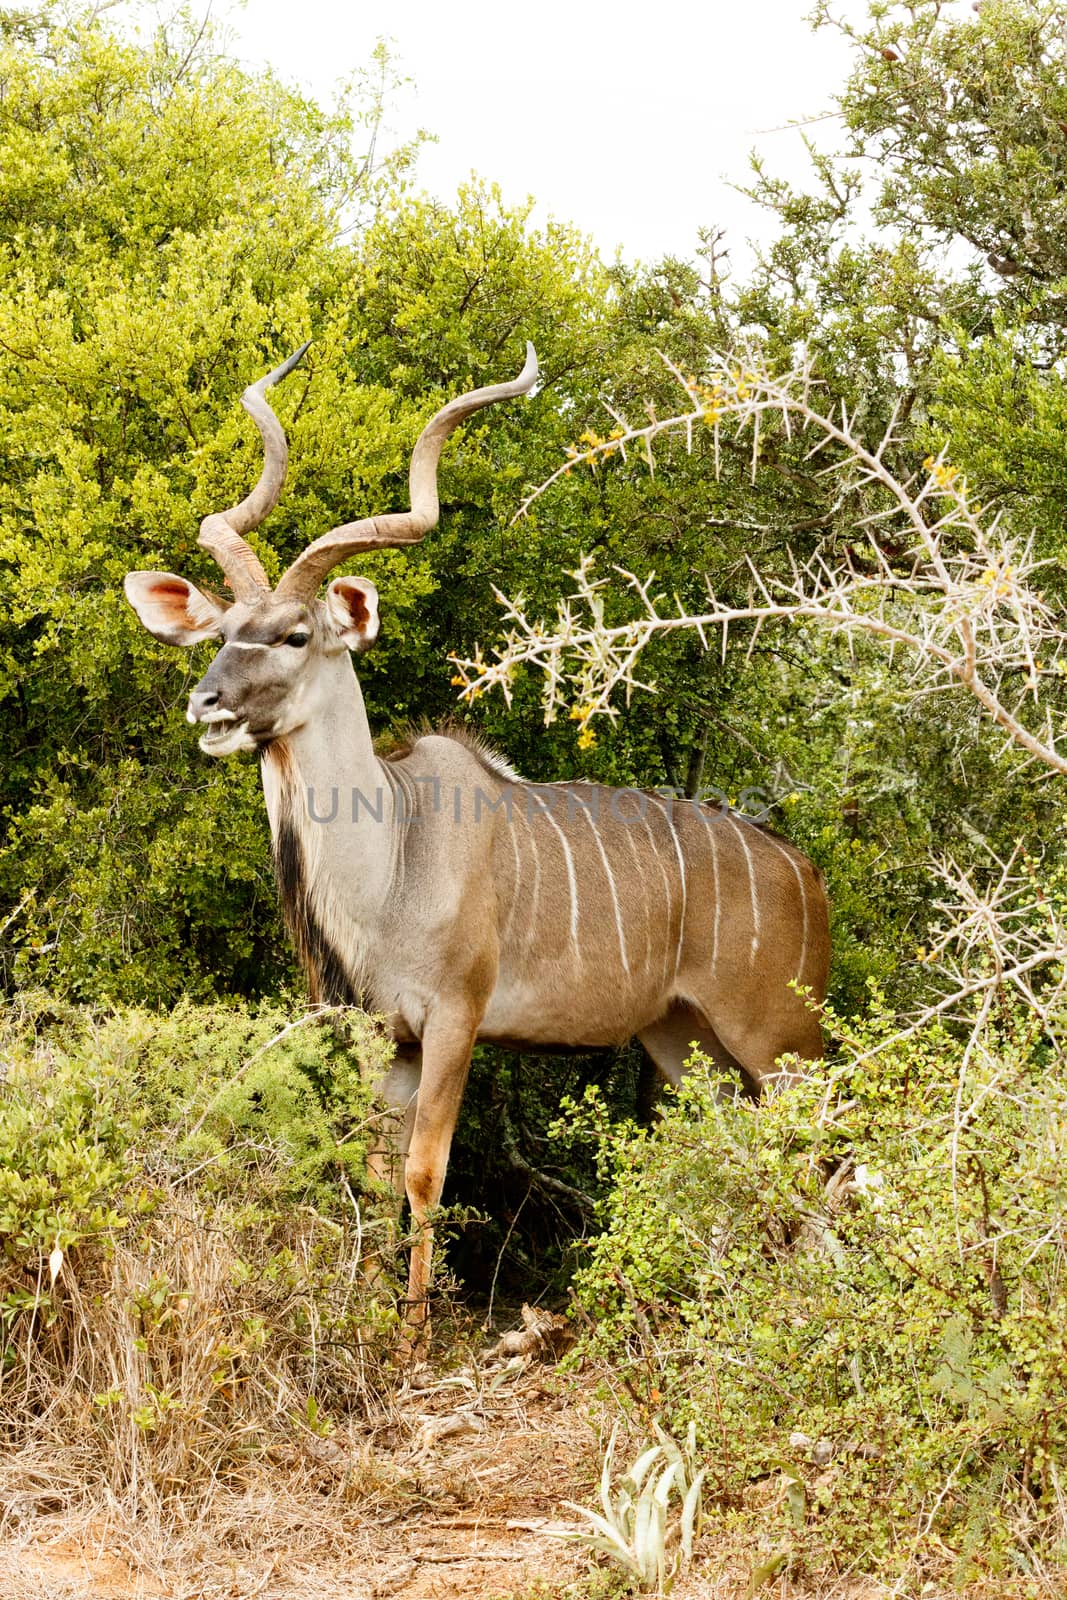 The Greater Kudu is a woodland antelope found throughout eastern and southern Africa. Despite occupying such widespread territory, they are sparsely populated in most areas.